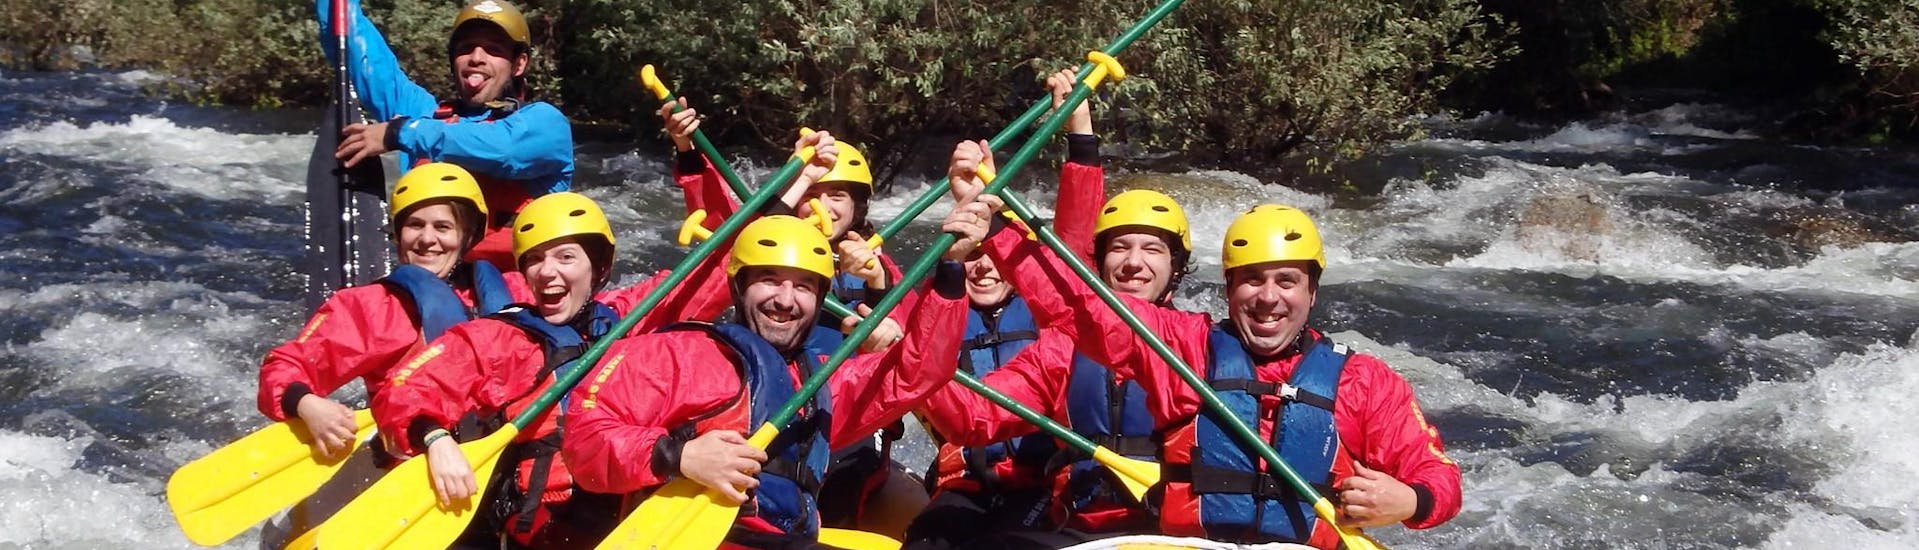 During the Class III Rafting on Rio Paiva in Arouca Geopark, the participants and the guide from Clube do Paiva are posing for a picture while rafting down Rio Paiva.